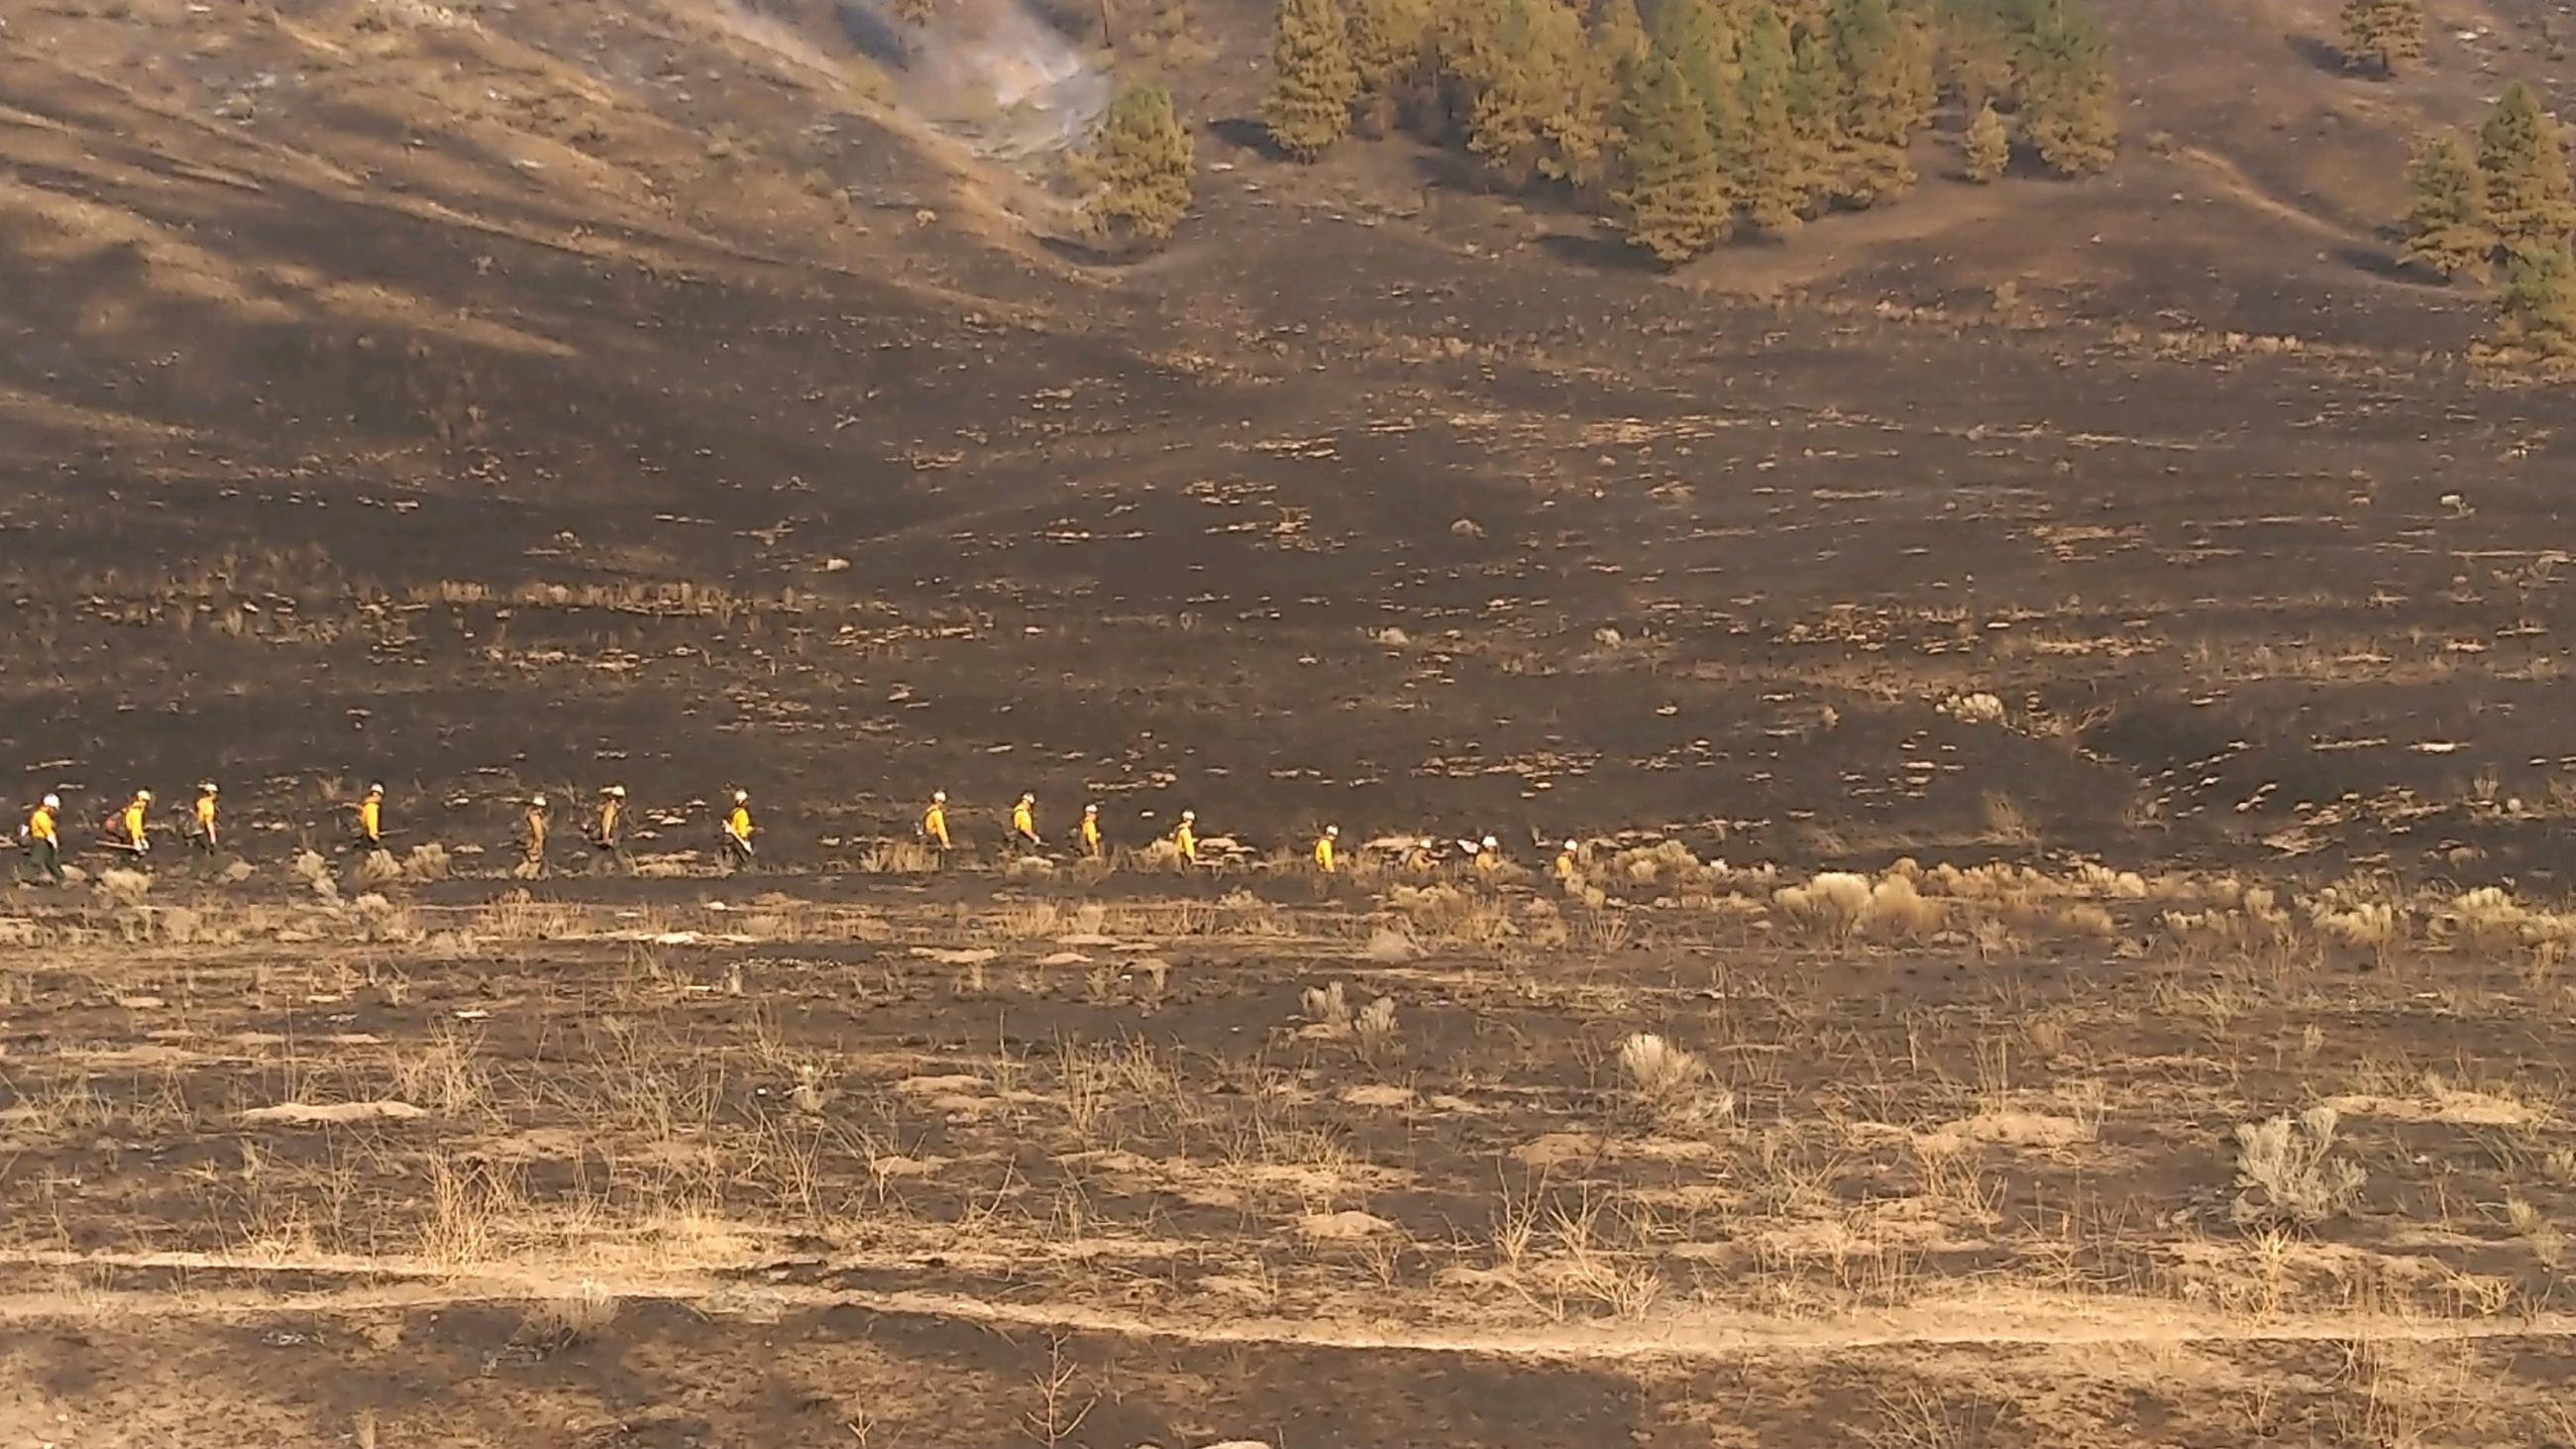 A horizontal line of people in yellow firefighting shirts is in the center, middle distance of this phot. The ground around them has been recently burned